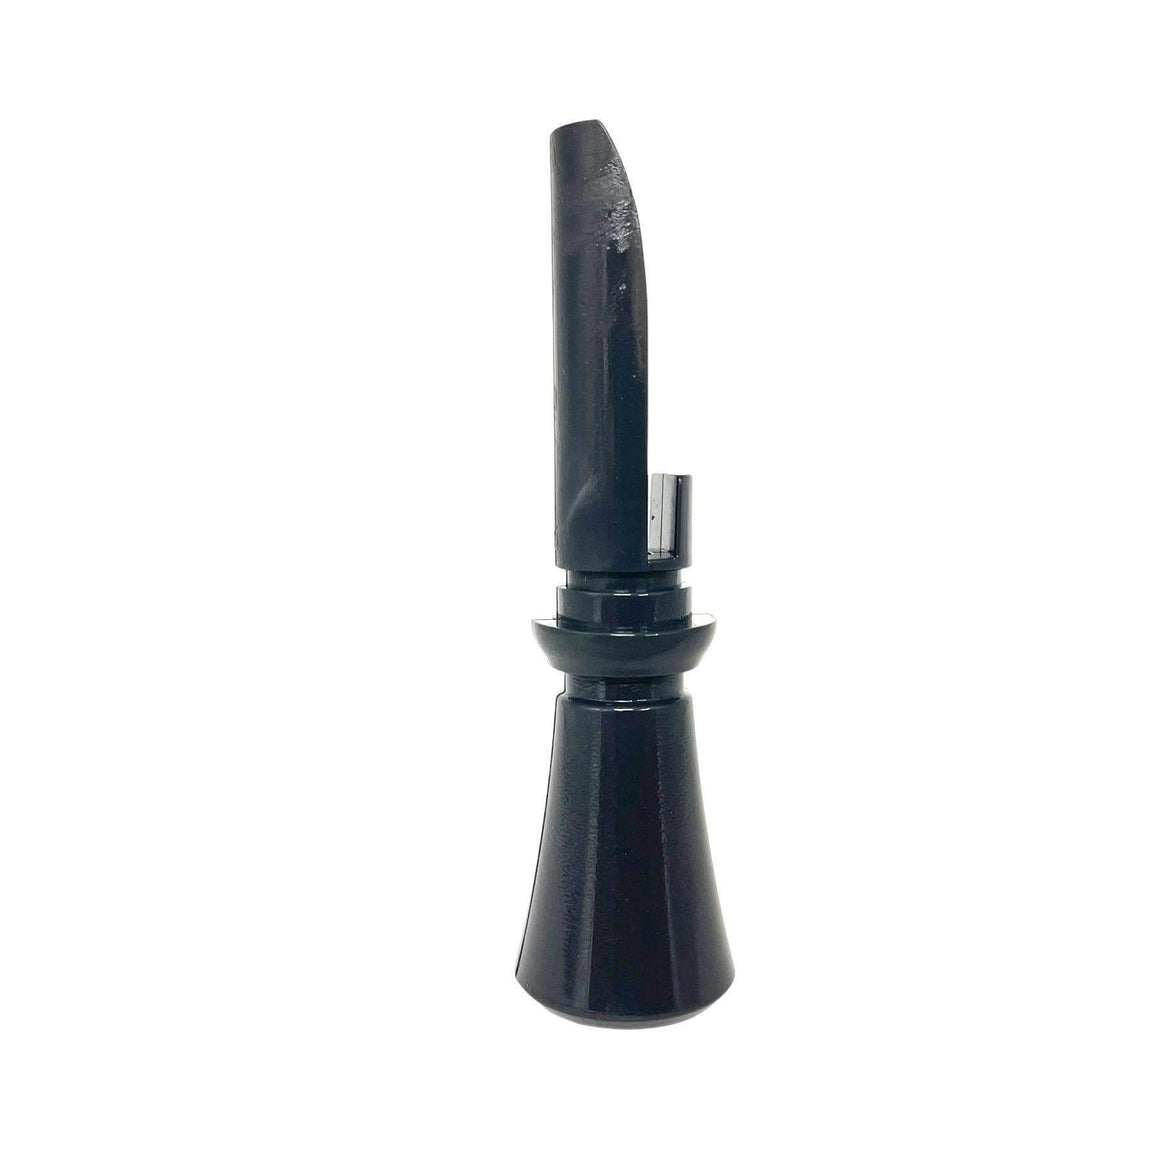 CHARCOAL POLYCARBONATE DUCK CALL INSERT